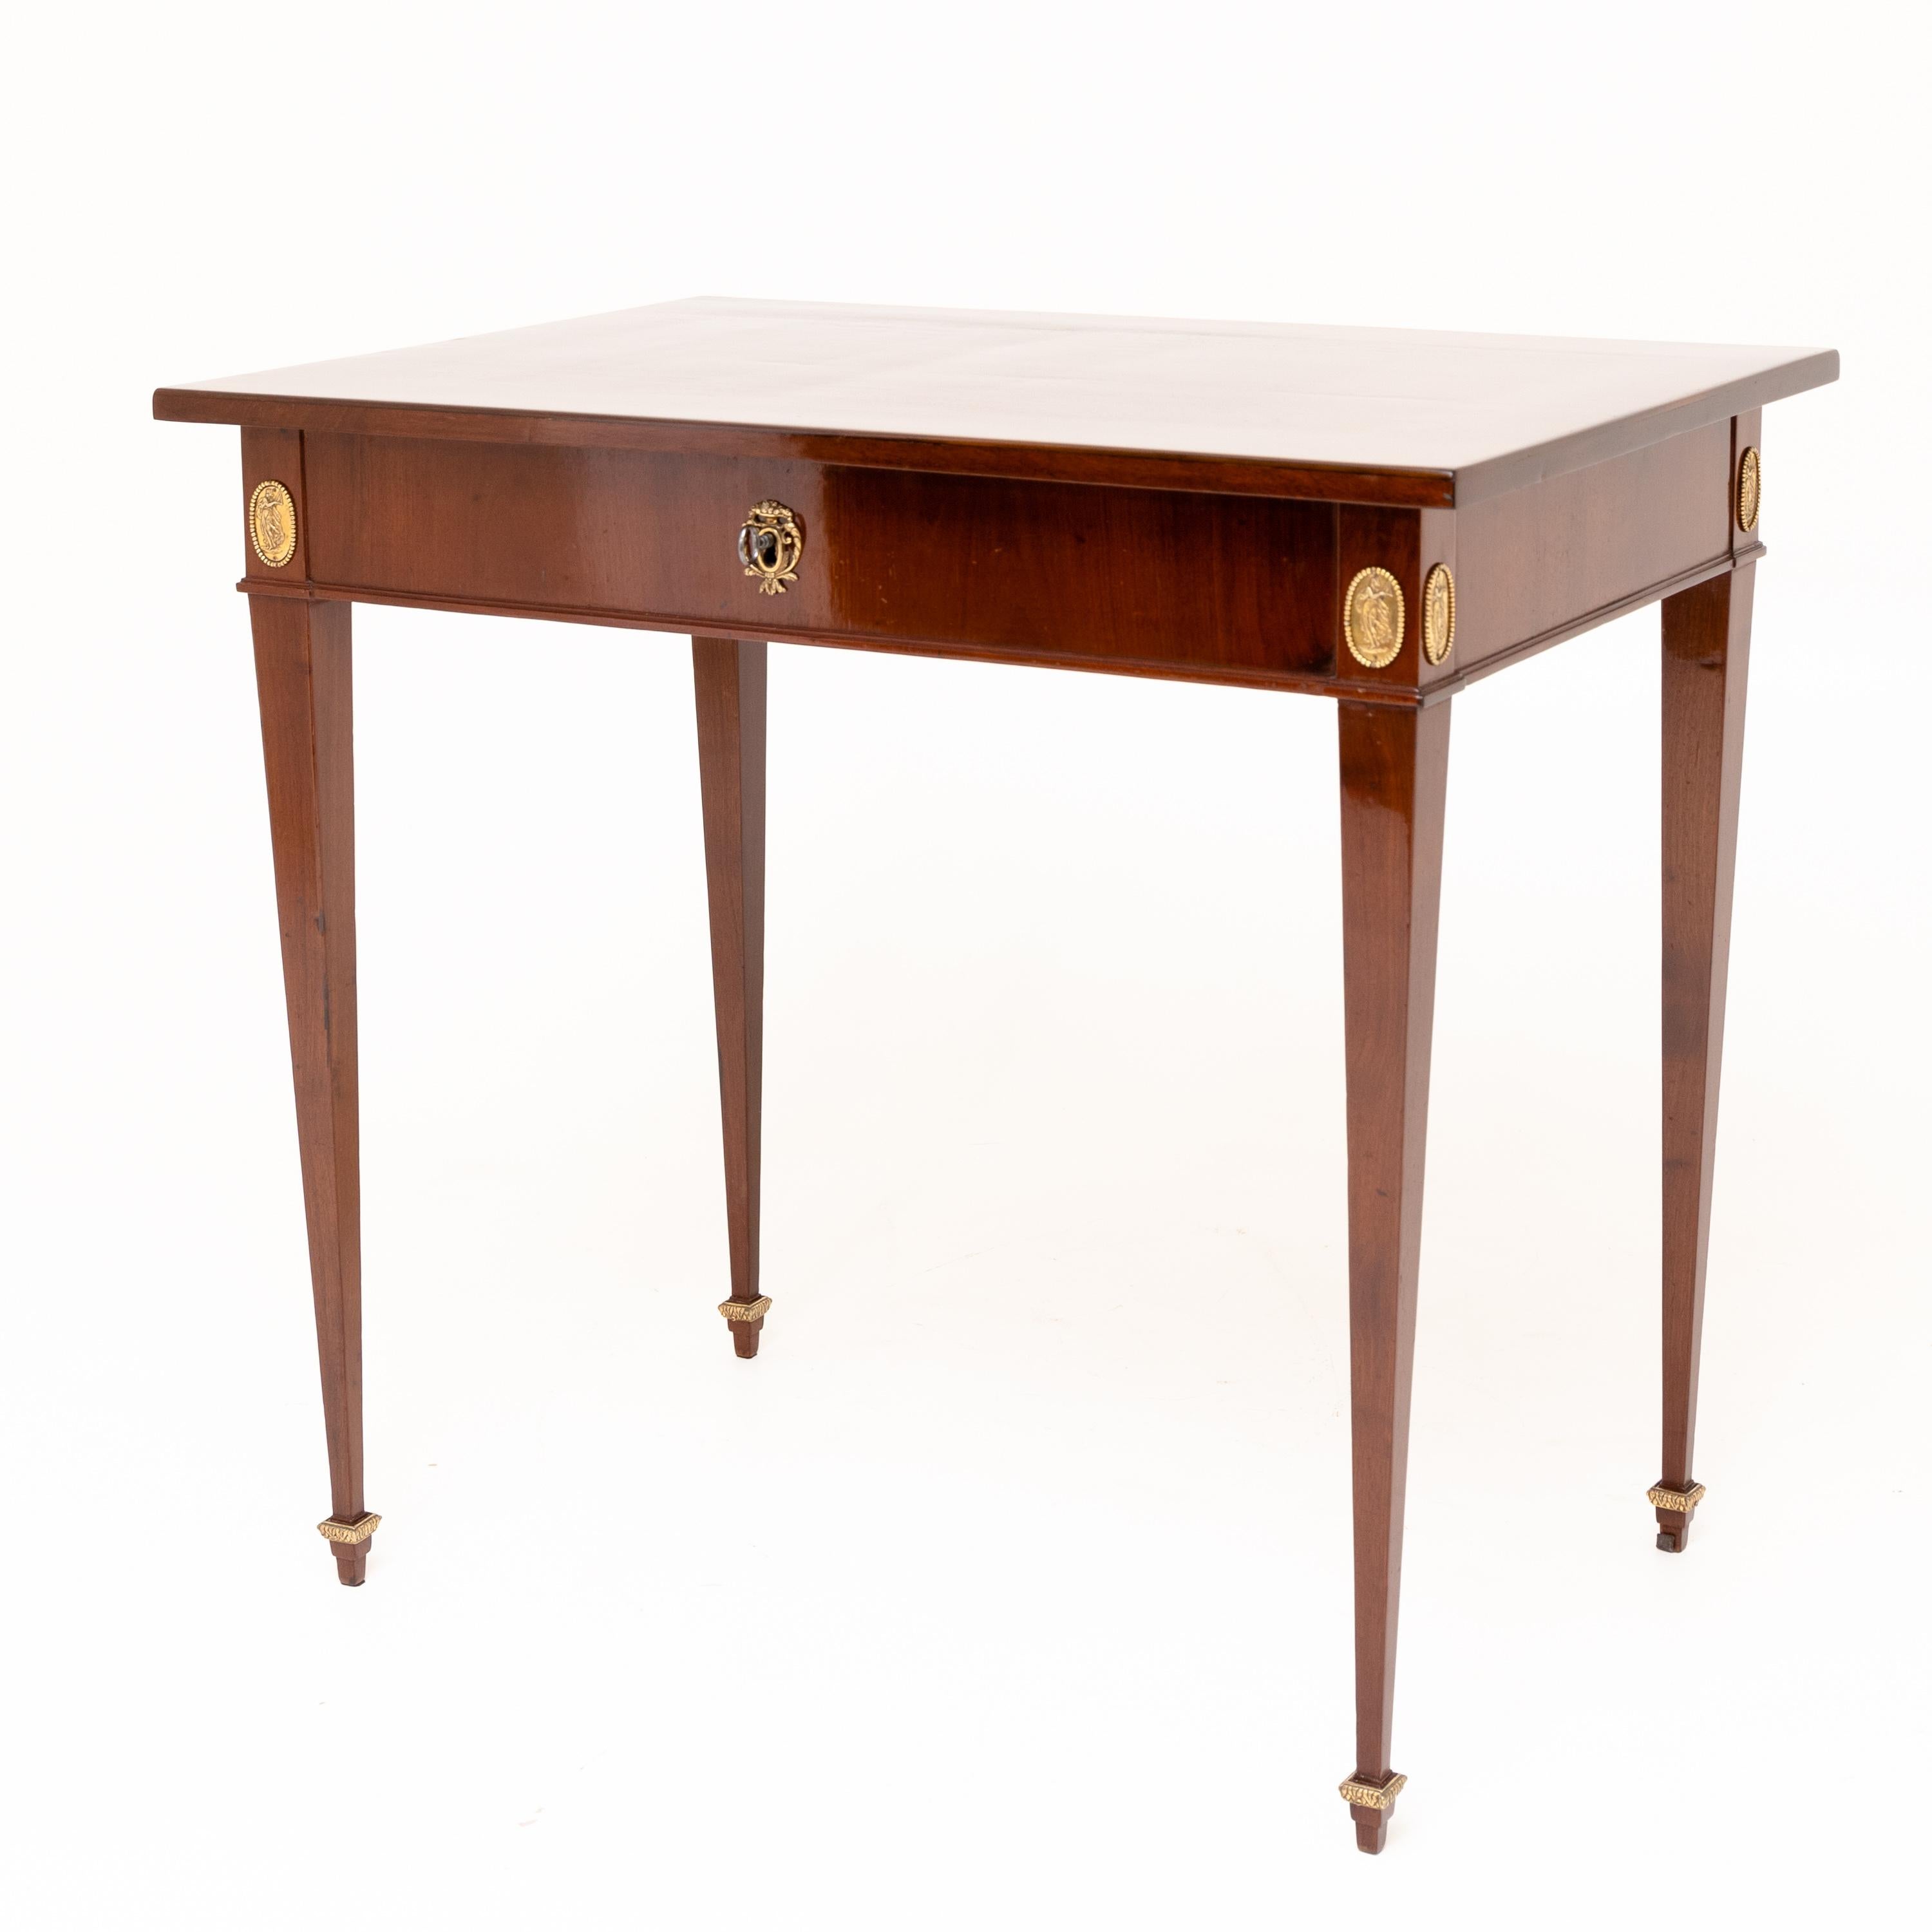 Mahogany table standing on four tall slender and square legs with slightly cranked corners with medallion decoration and rectangular tabletop. The tabletop can be pushed back and reveals the lockable compartment hidden in the frame.